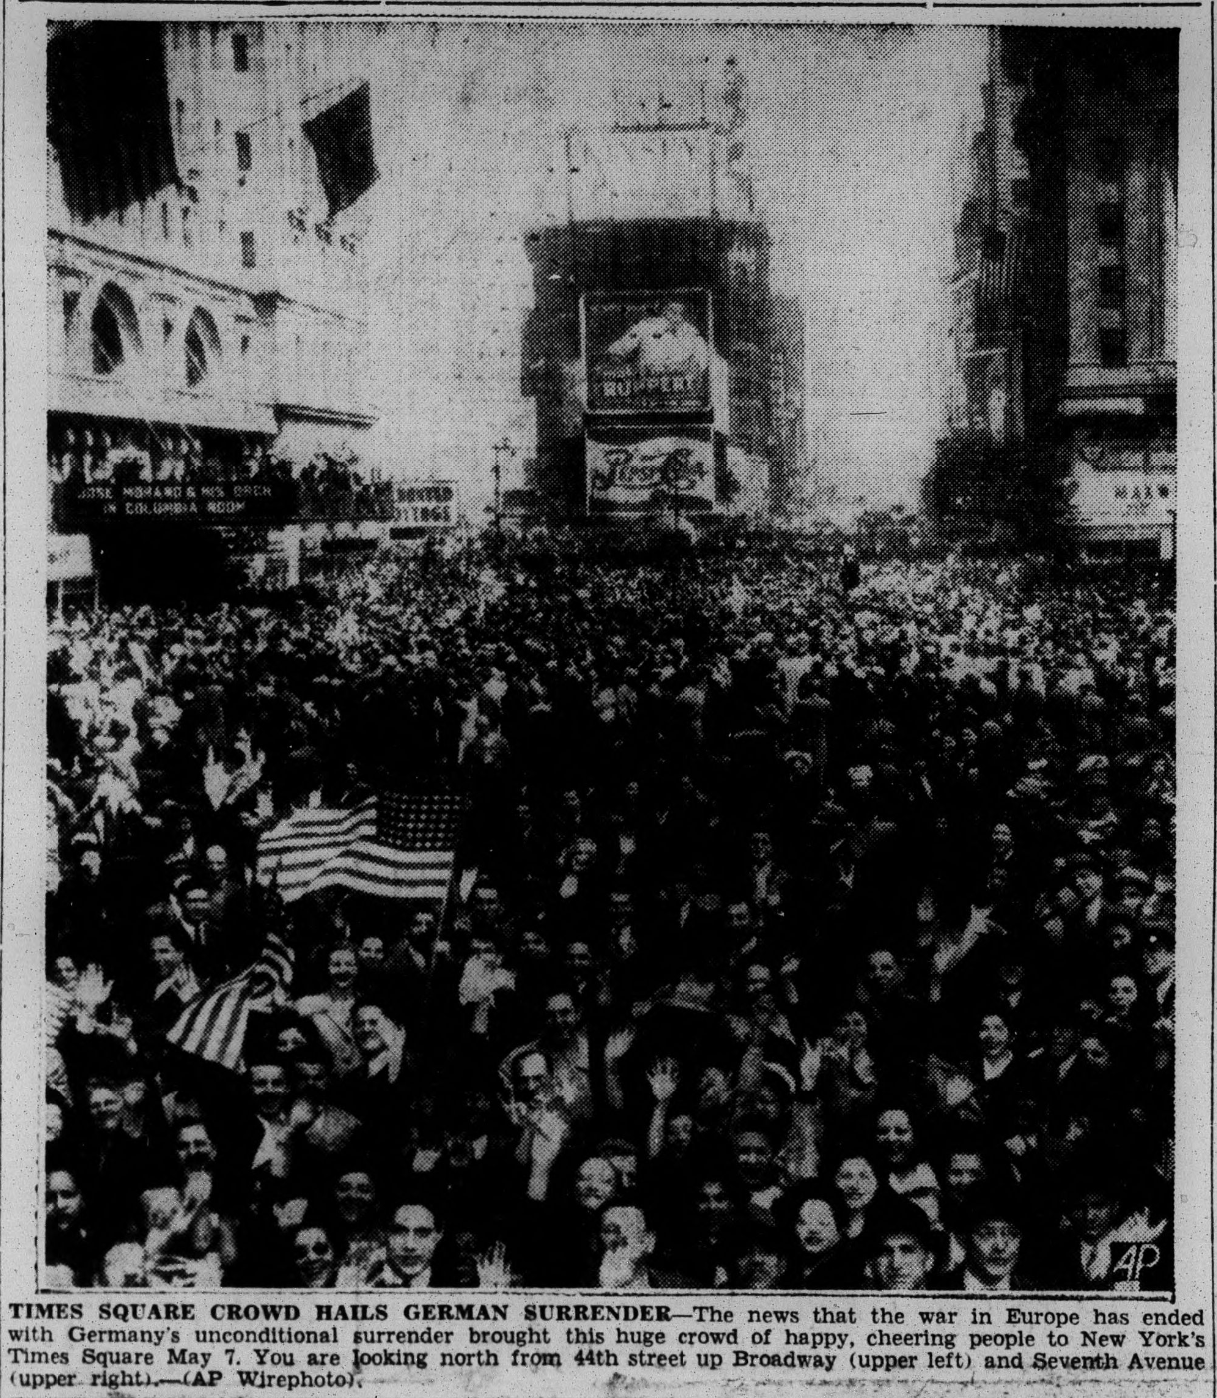 Crowd of people in New York City's Time Square, celebrating Victory in Europe Day.